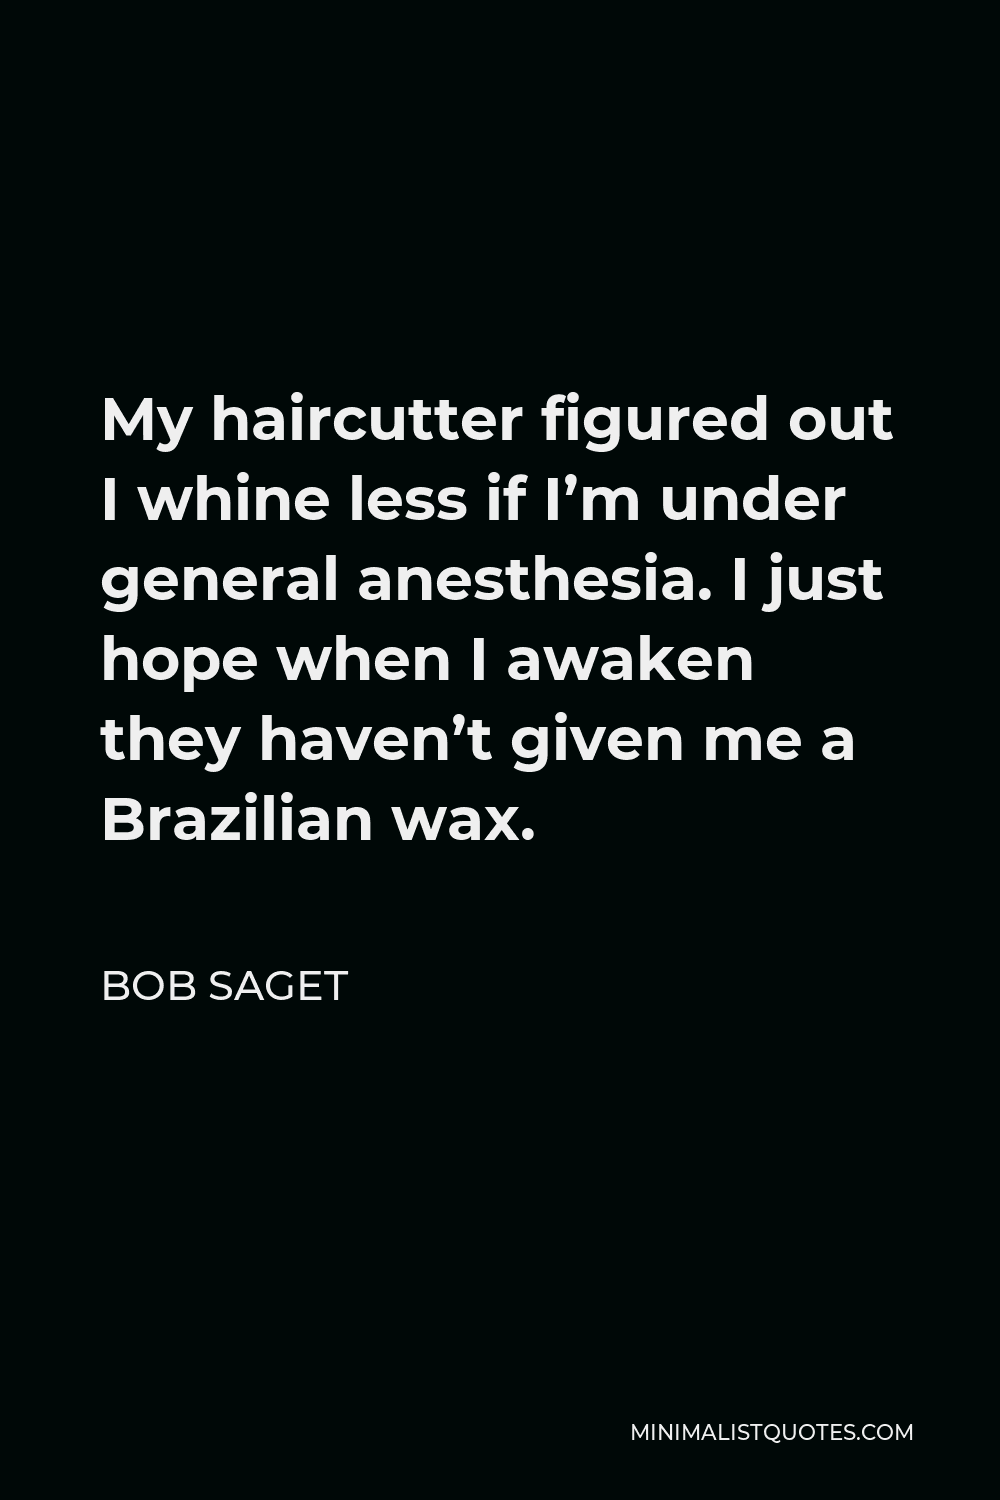 Bob Saget Quote - My haircutter figured out I whine less if I’m under general anesthesia. I just hope when I awaken they haven’t given me a Brazilian wax.